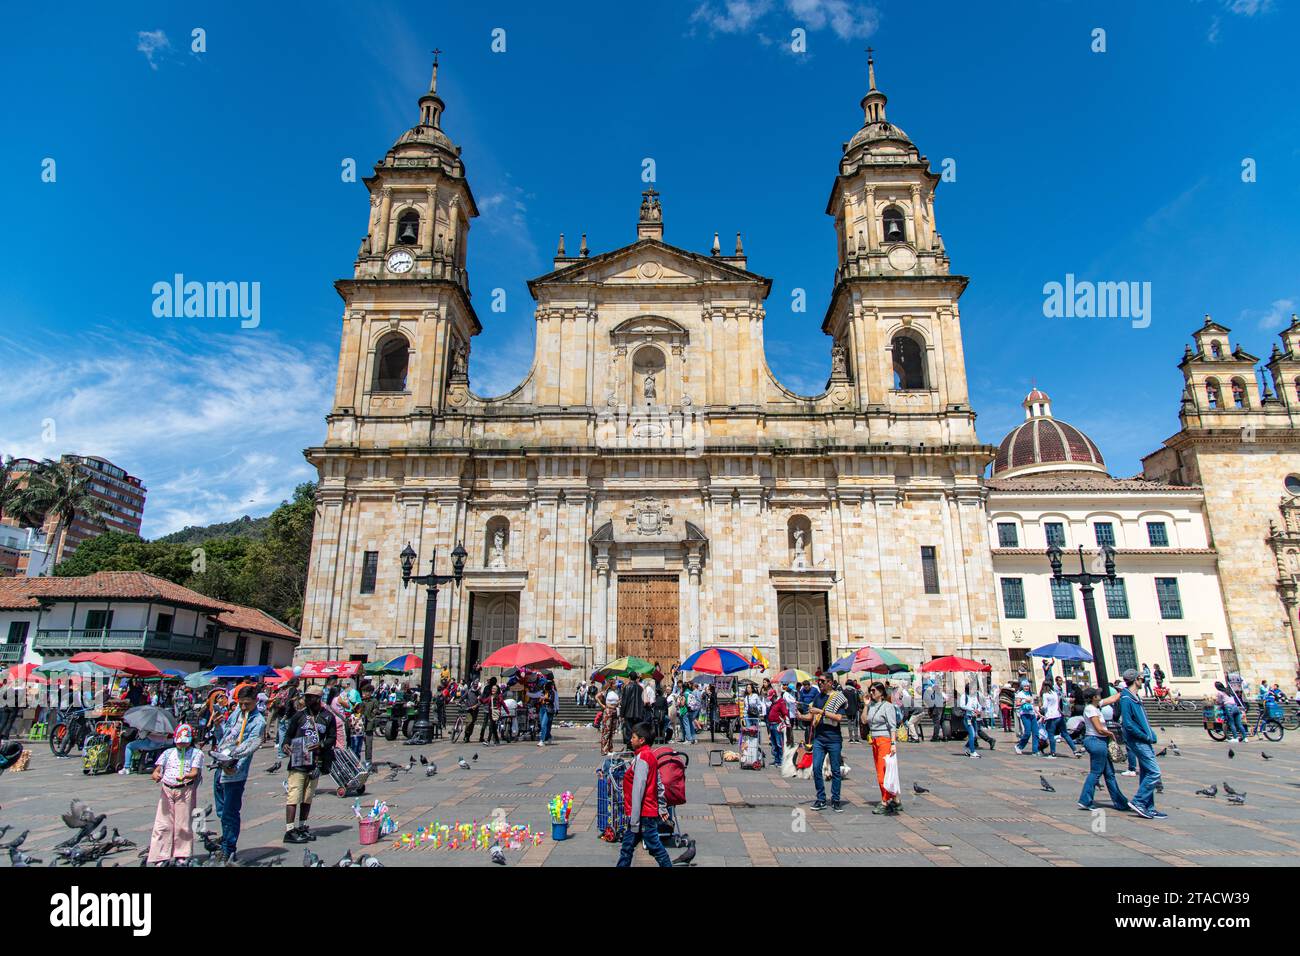 The front entrance of the Catedral Primada de Colombia at Plaza de Bolívar in Bogotá, Colombia Stock Photo